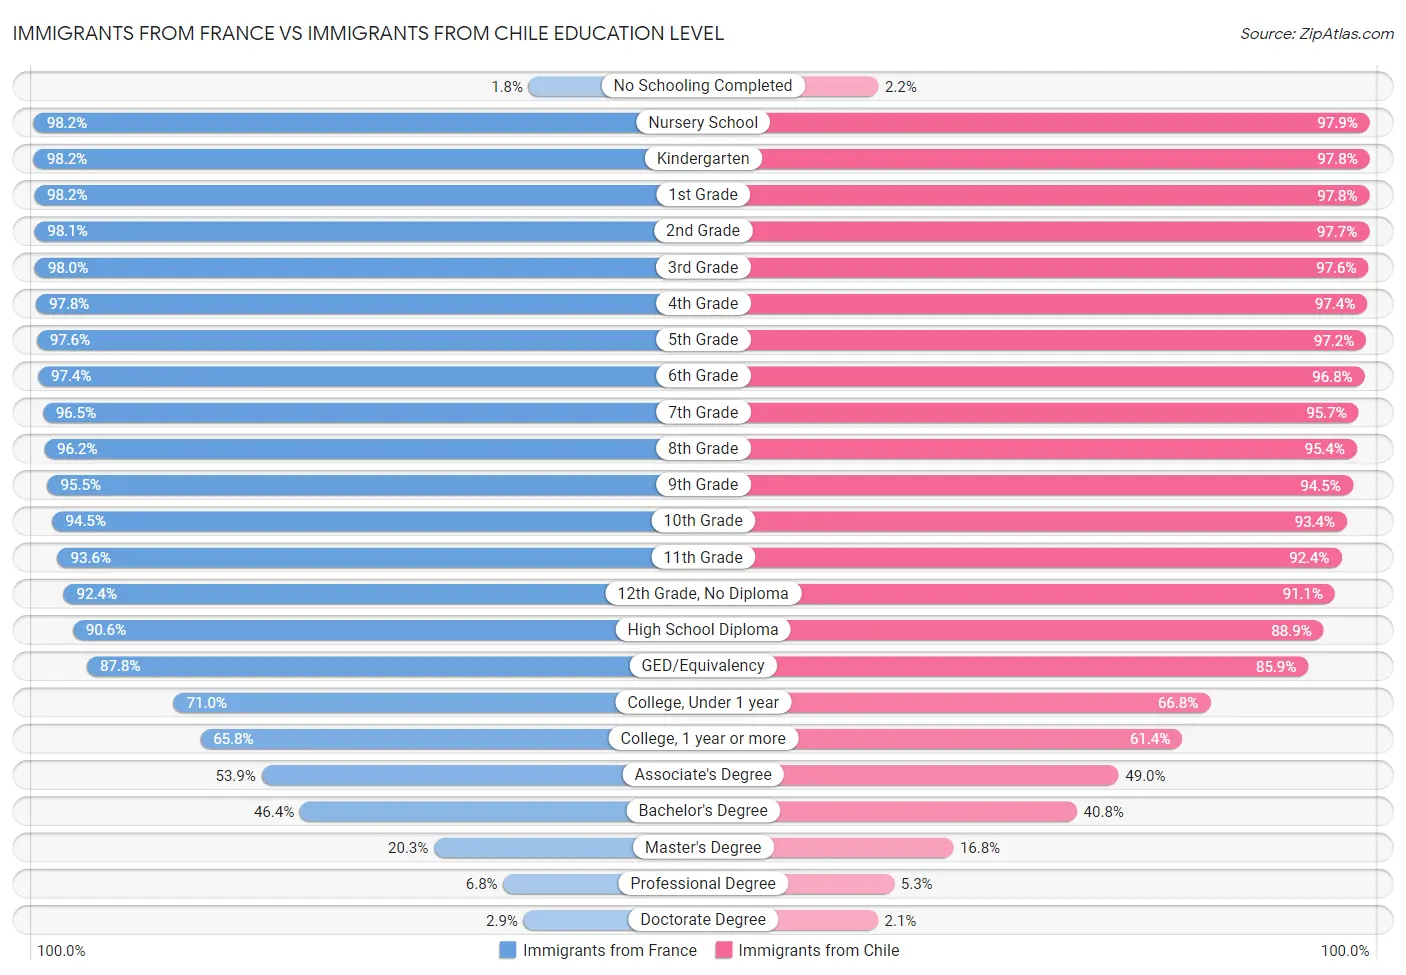 Immigrants from France vs Immigrants from Chile Education Level